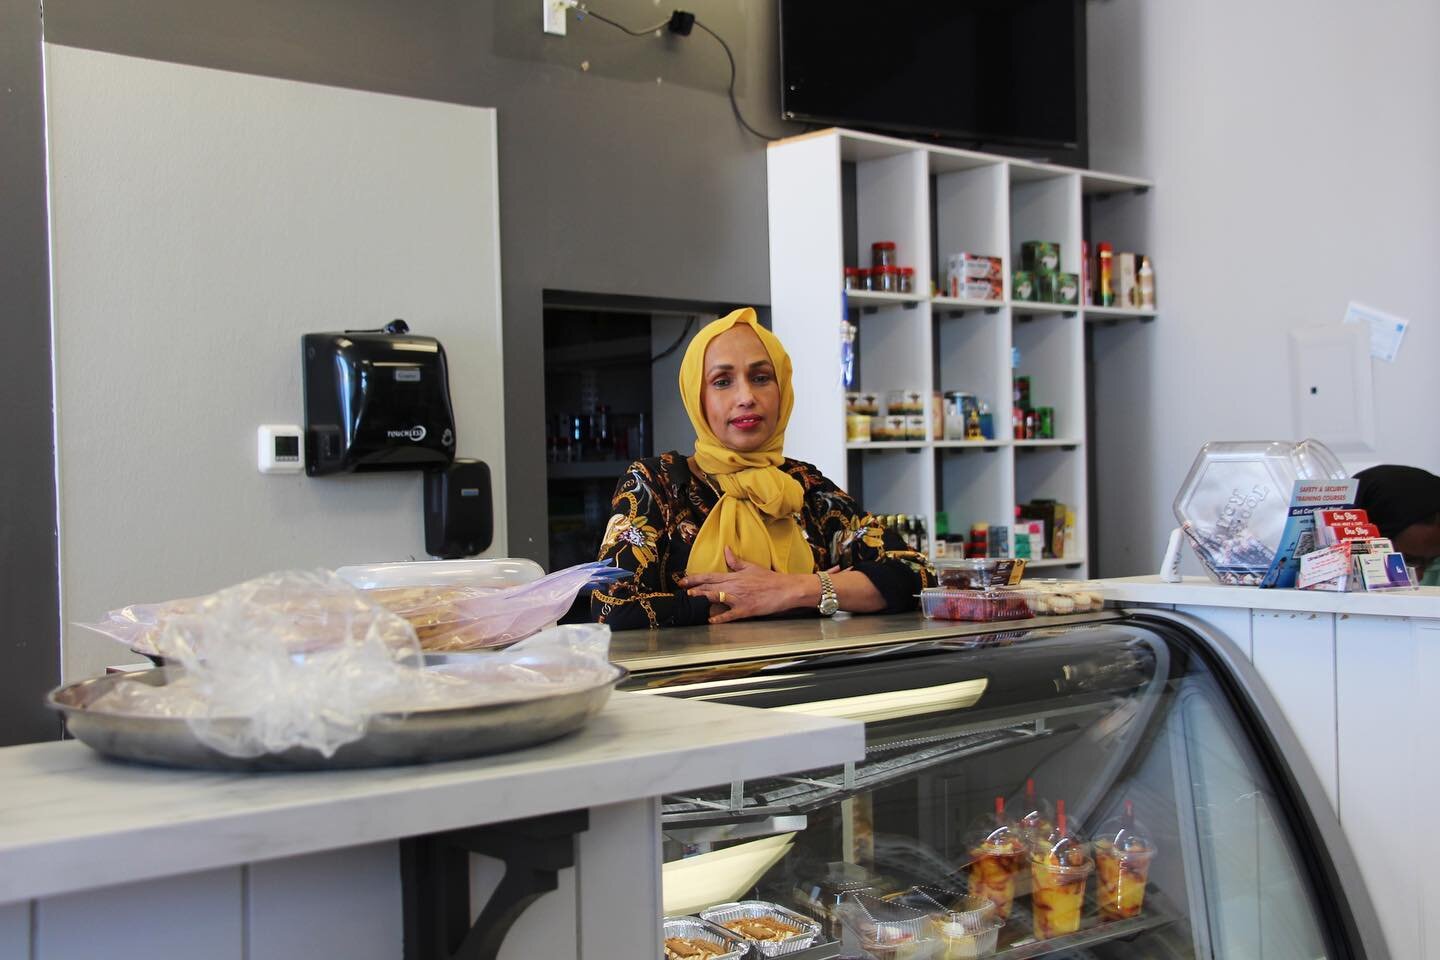 Discover another gem on the Avenue: 

🌙One Stop Halal and Cafe✨ 

Located at 1748 81 St NW, Edmonton, AB T5B 2S4, this hidden treasure owned by Deqa Sugulle offers a variety of specialty halal meats, imported items, including exotic spices, drinks, 